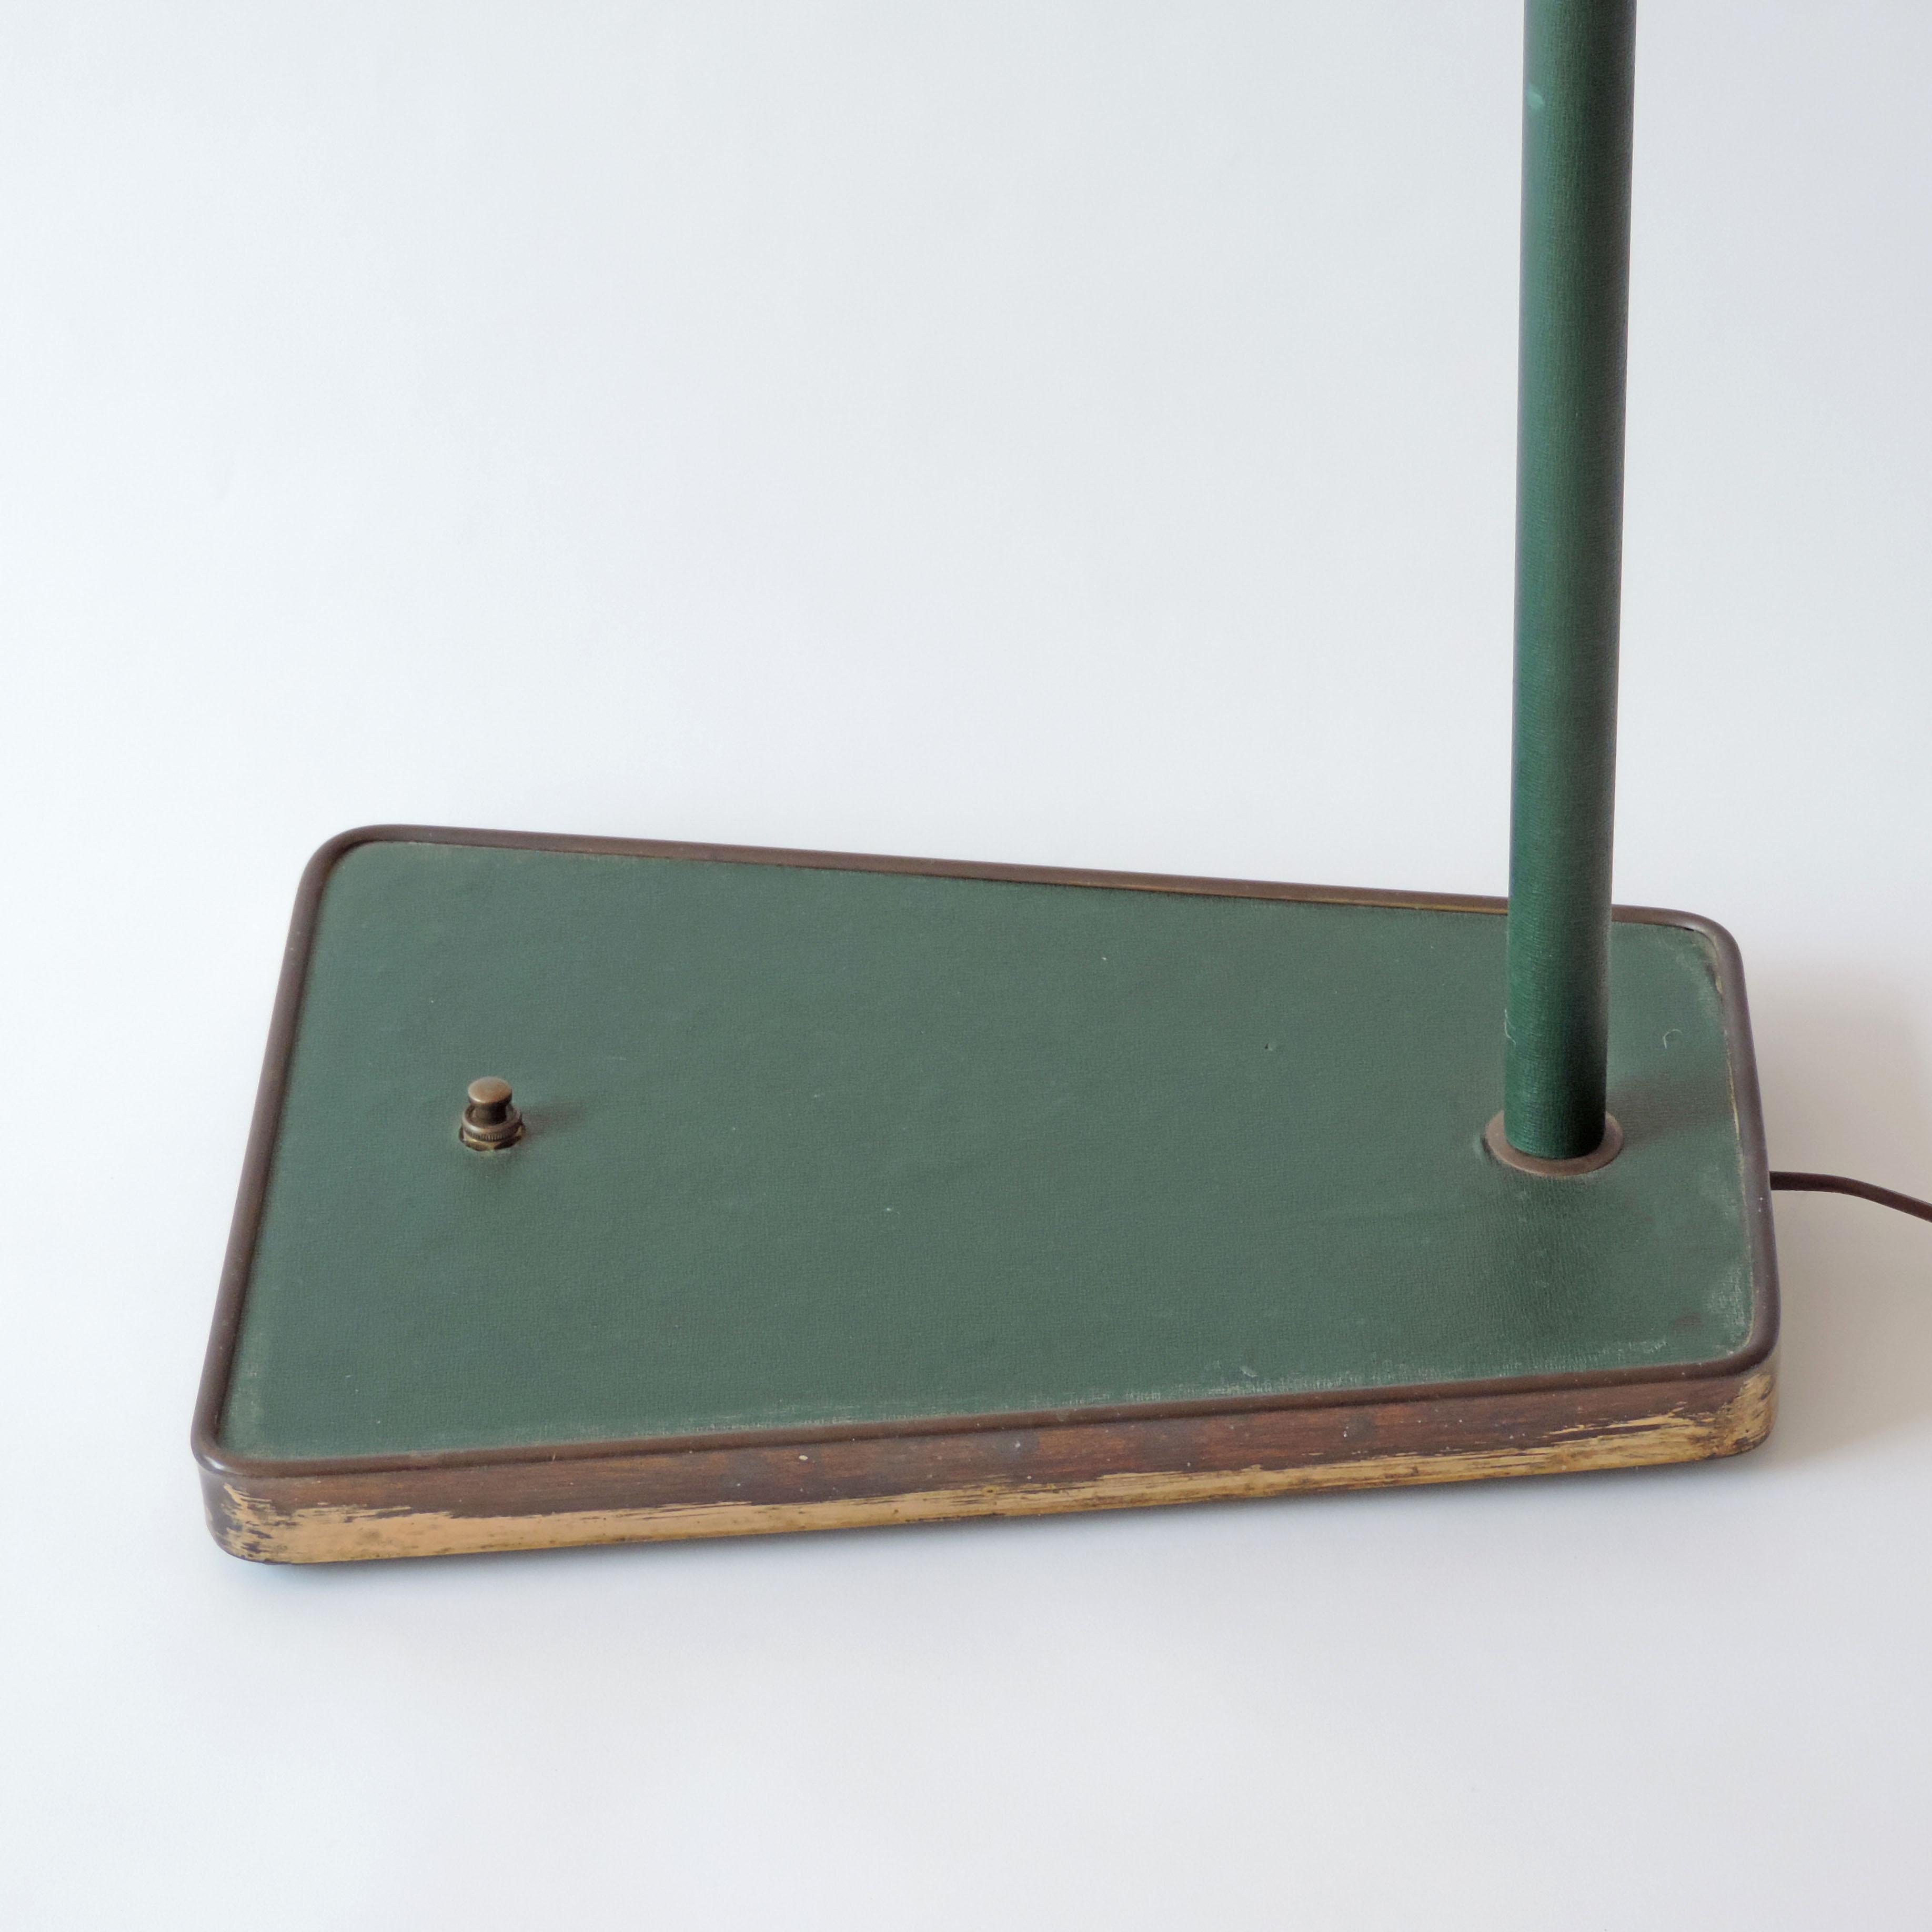 Rare Adjustable Italian Floor Lamp in Brass and Green Faux Leather, 1940s For Sale 2